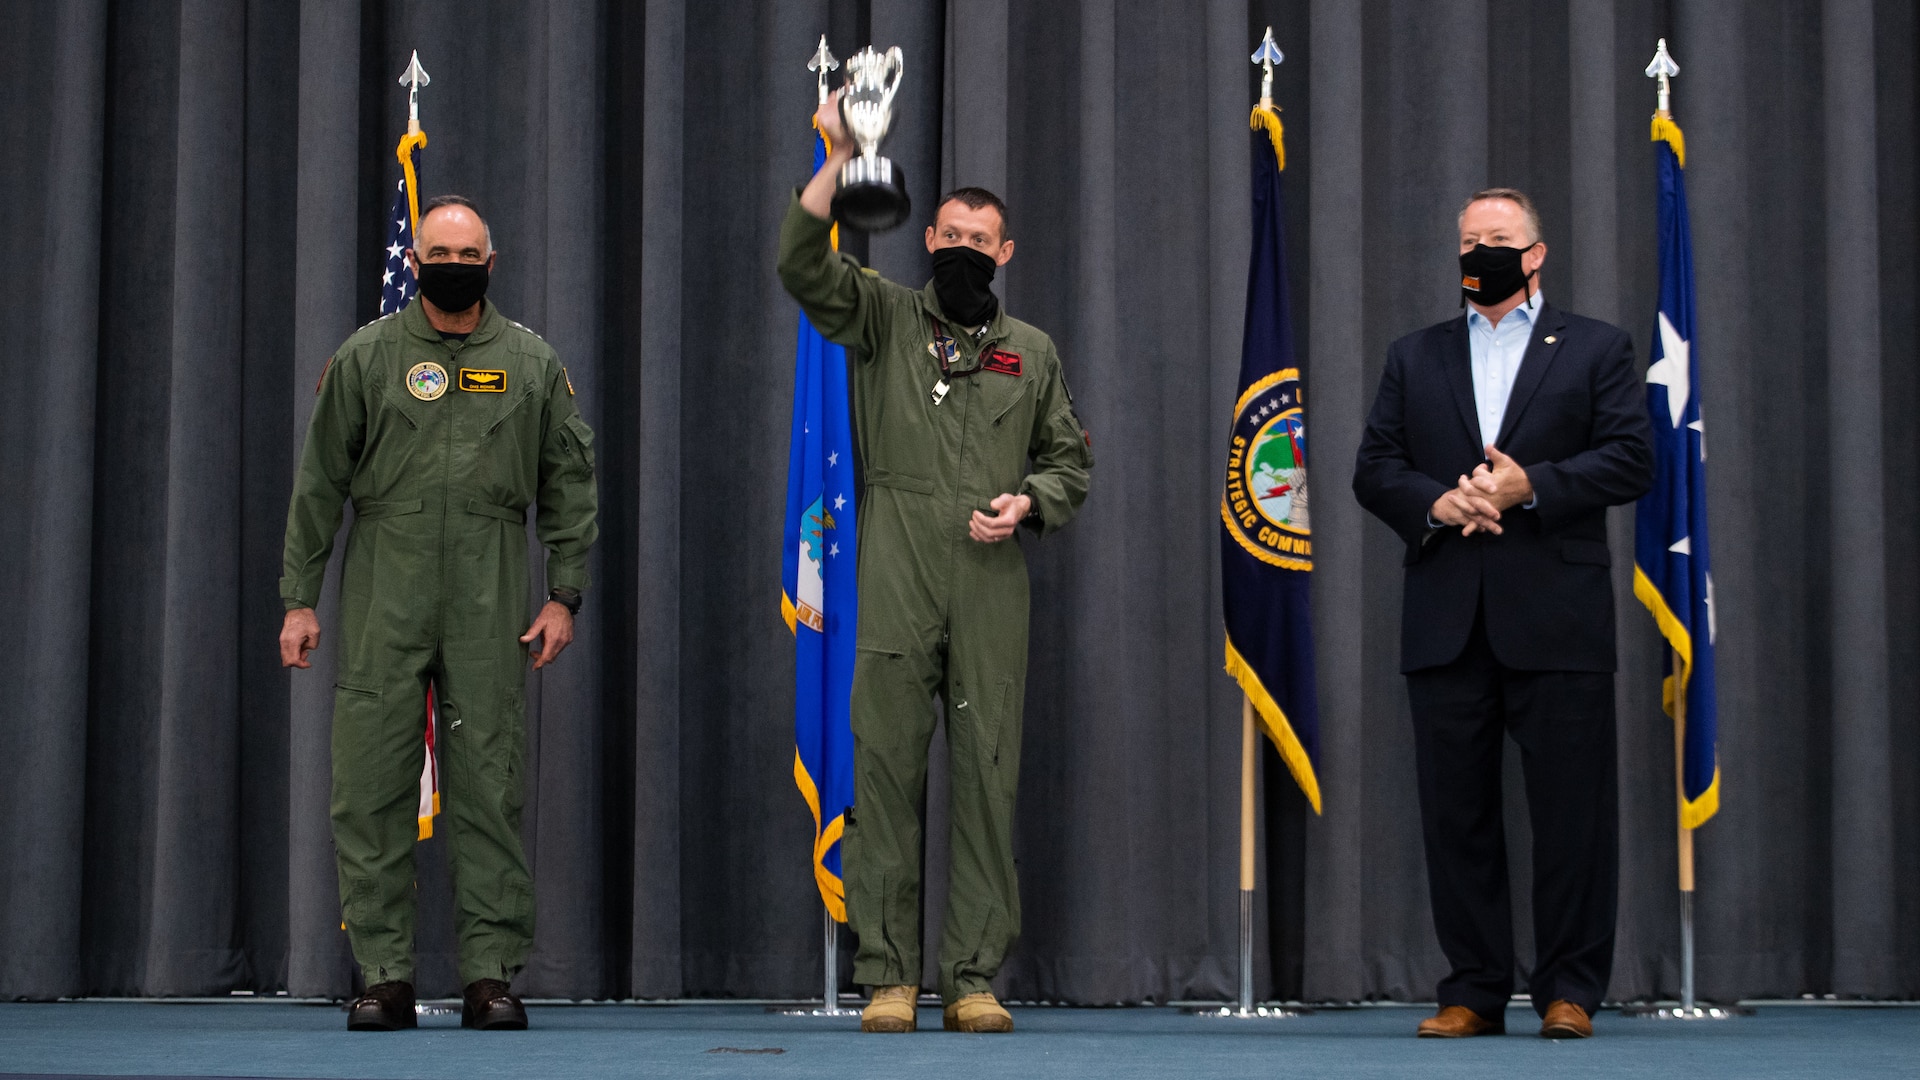 Lt. Col. Christopher Duff, center, raises the Omaha Trophy after receiving the award from Adm. Charles Richard, U.S. Strategic Command commander, left, and Mr. Tim Burke, right, Strategic Command Consultation Committee chairman, at Barksdale Air Force Base, Louisiana,  March 30, 2021. First awarded by the Strategic Air Command Consultation Committee  in 1971, the Omaha trophy is presented to units across the command in four official categories: intercontinental ballistic missile squadron, ballistic missile submarine, strategic bomber squadron, and global operations squadron. (U.S. Air Force photo by Airman 1st Class Jacob B. Wrightsman)